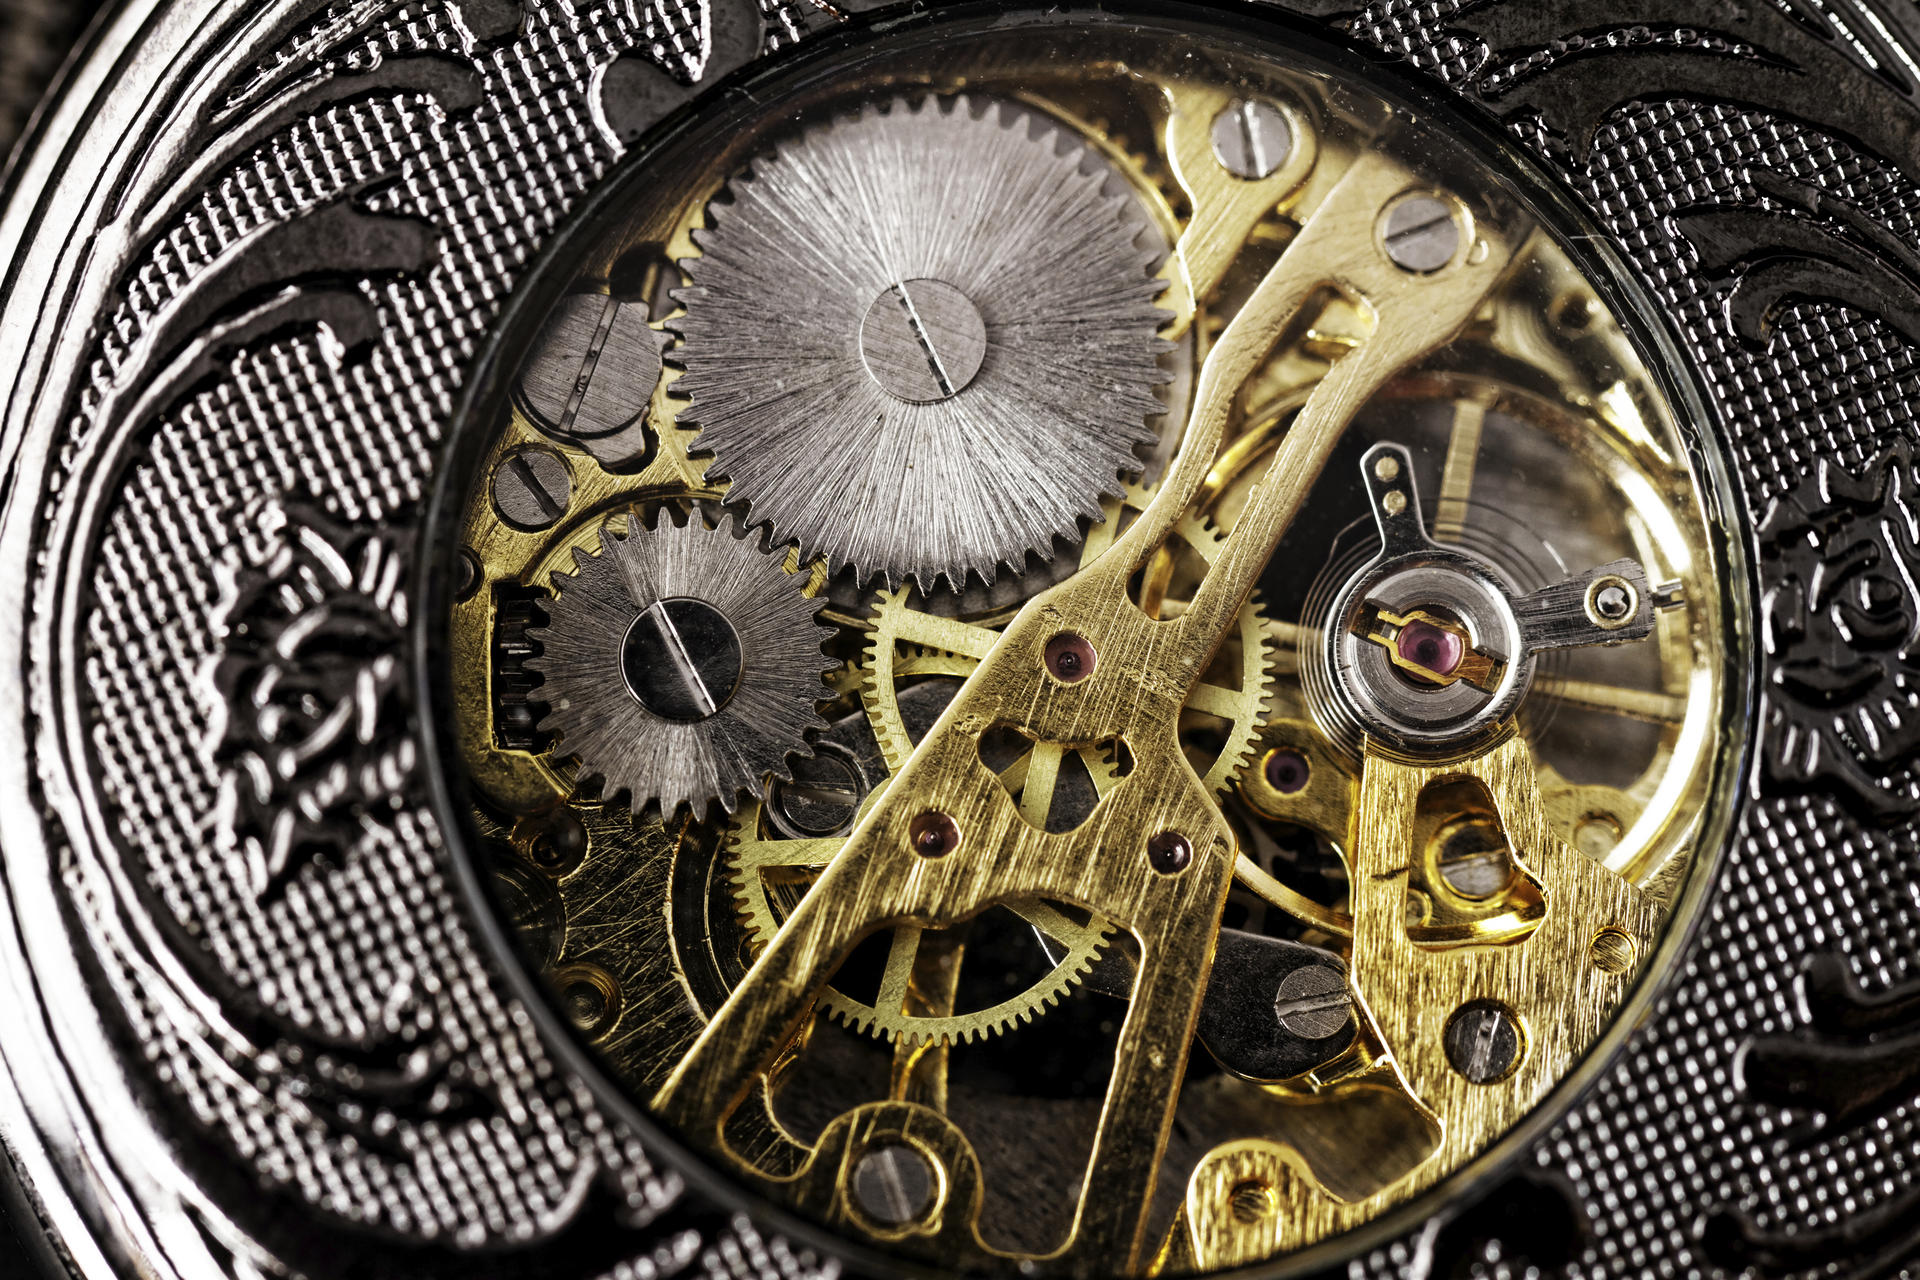 Exceptional timepieces will be shown at Watches&amp;Wonders this week.Photo: Thinkstock